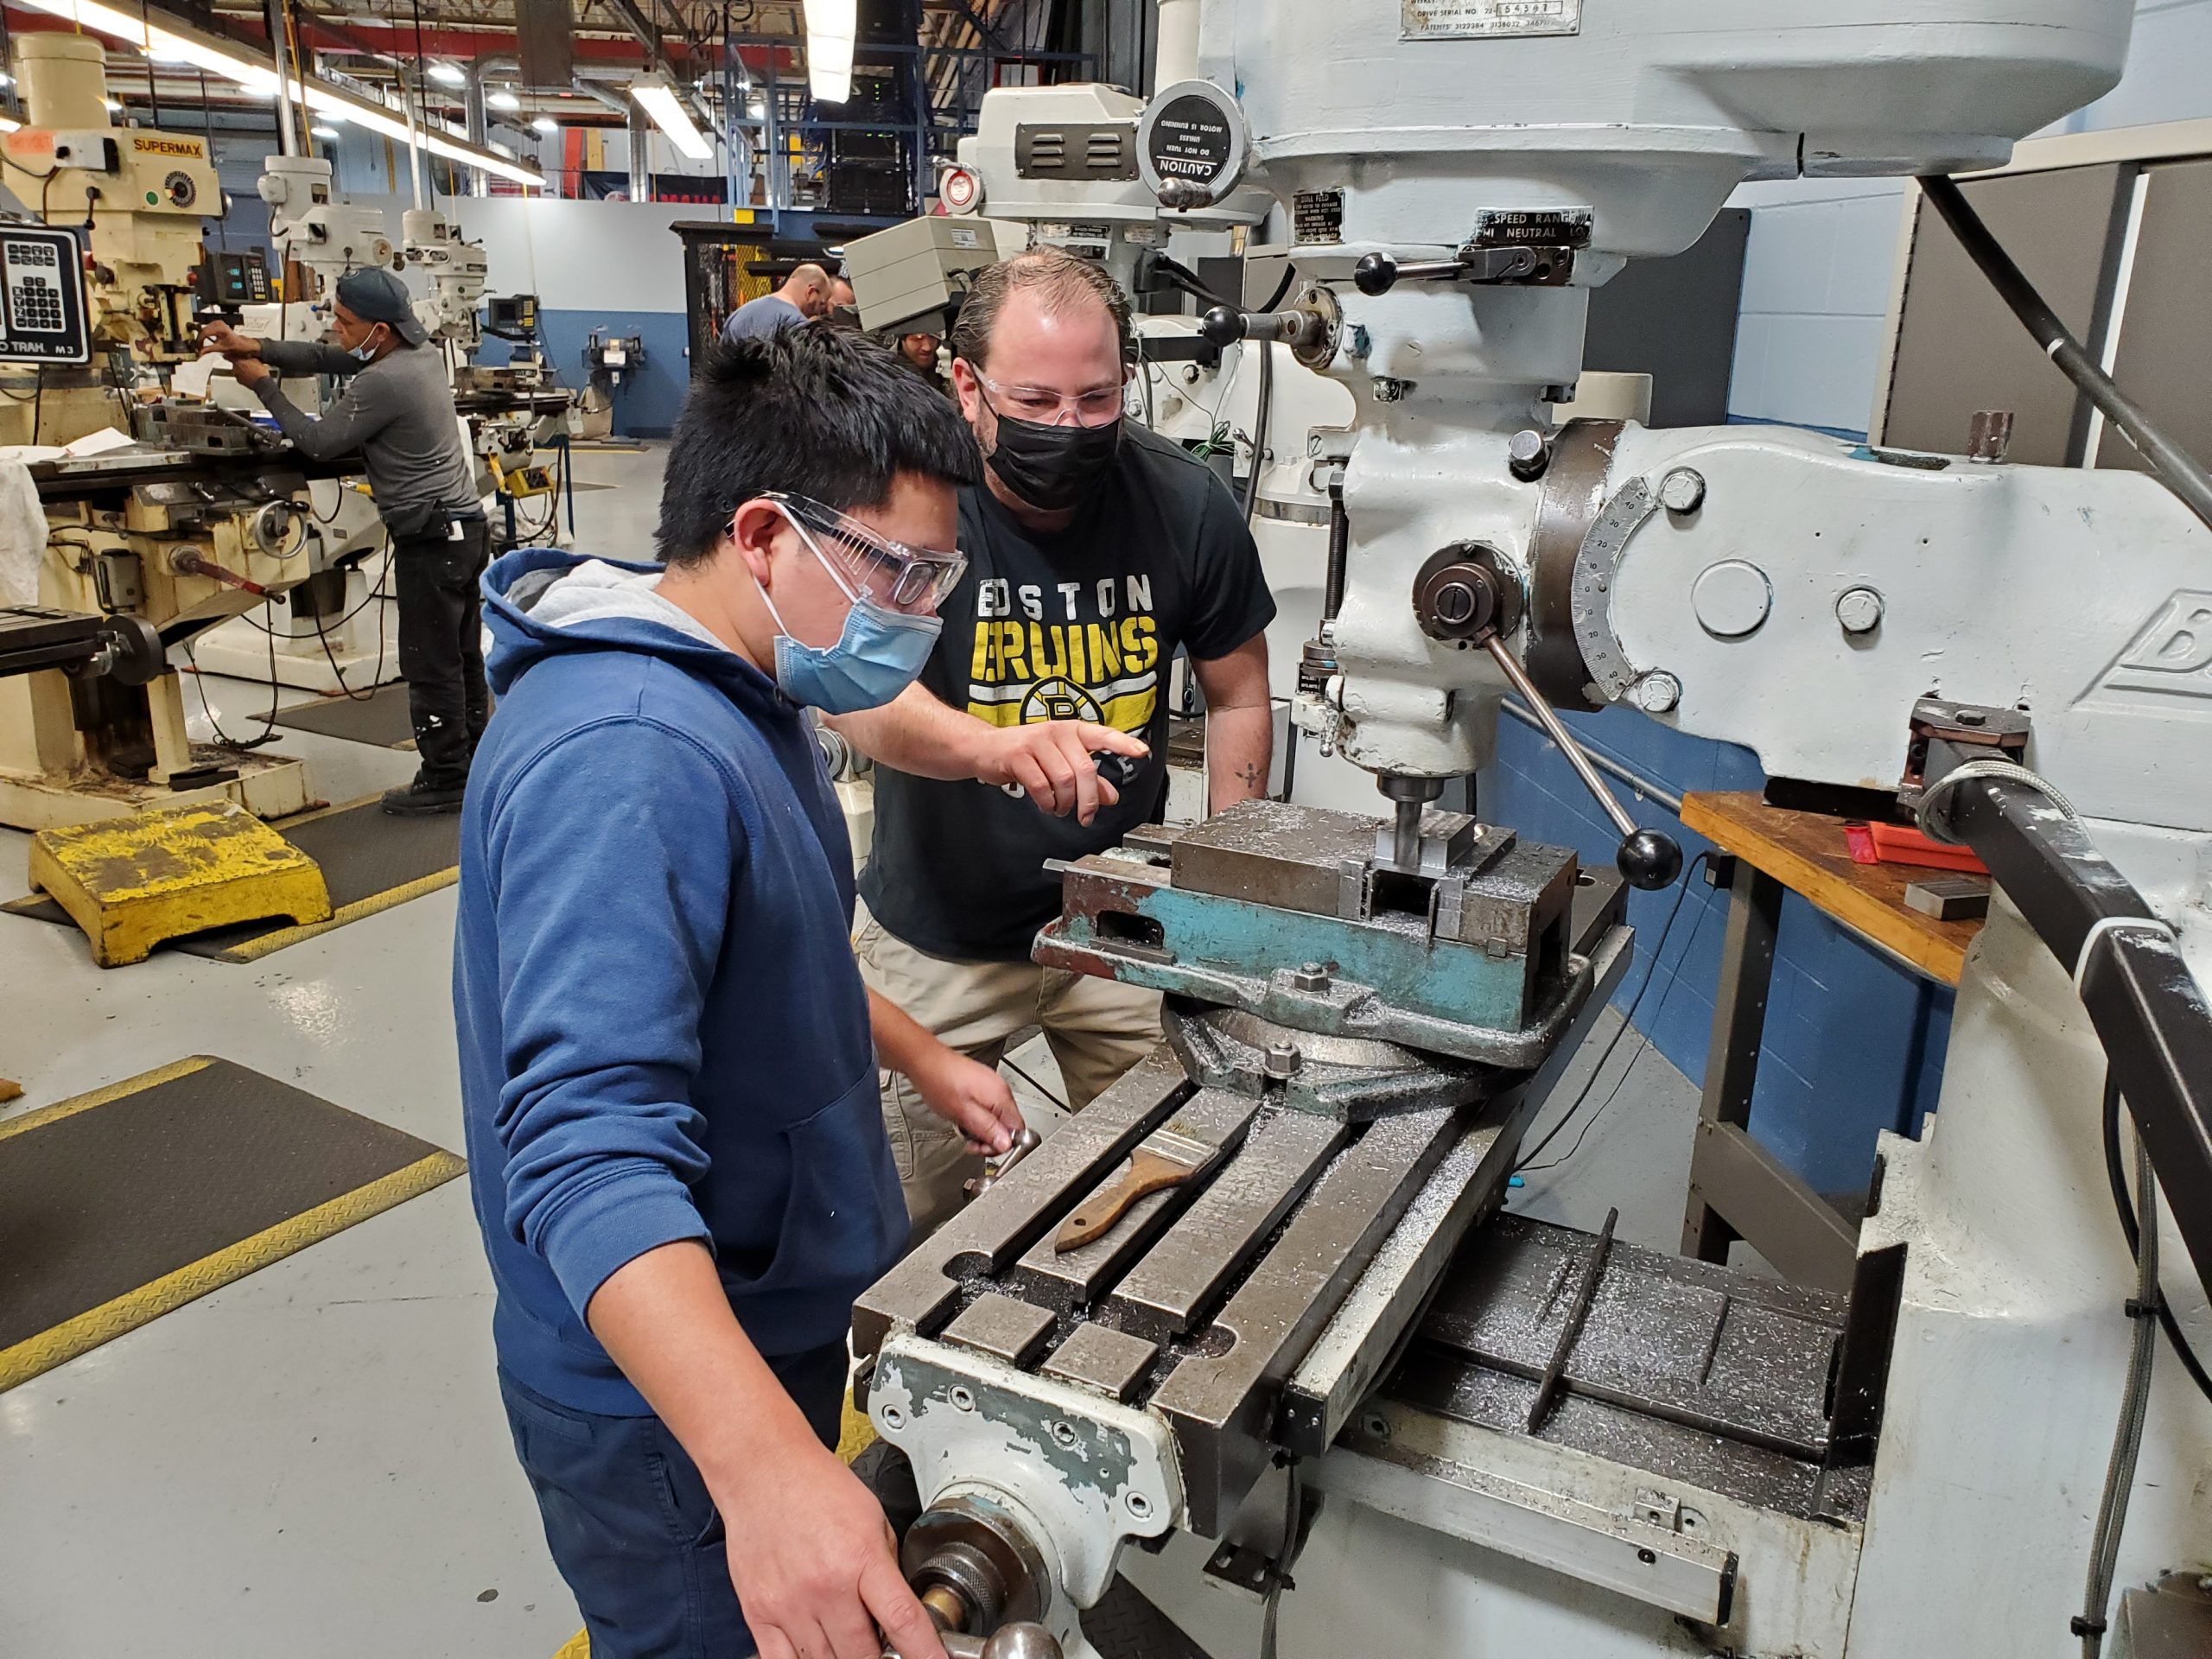 Advance Manufacturing student working on machine with instructor